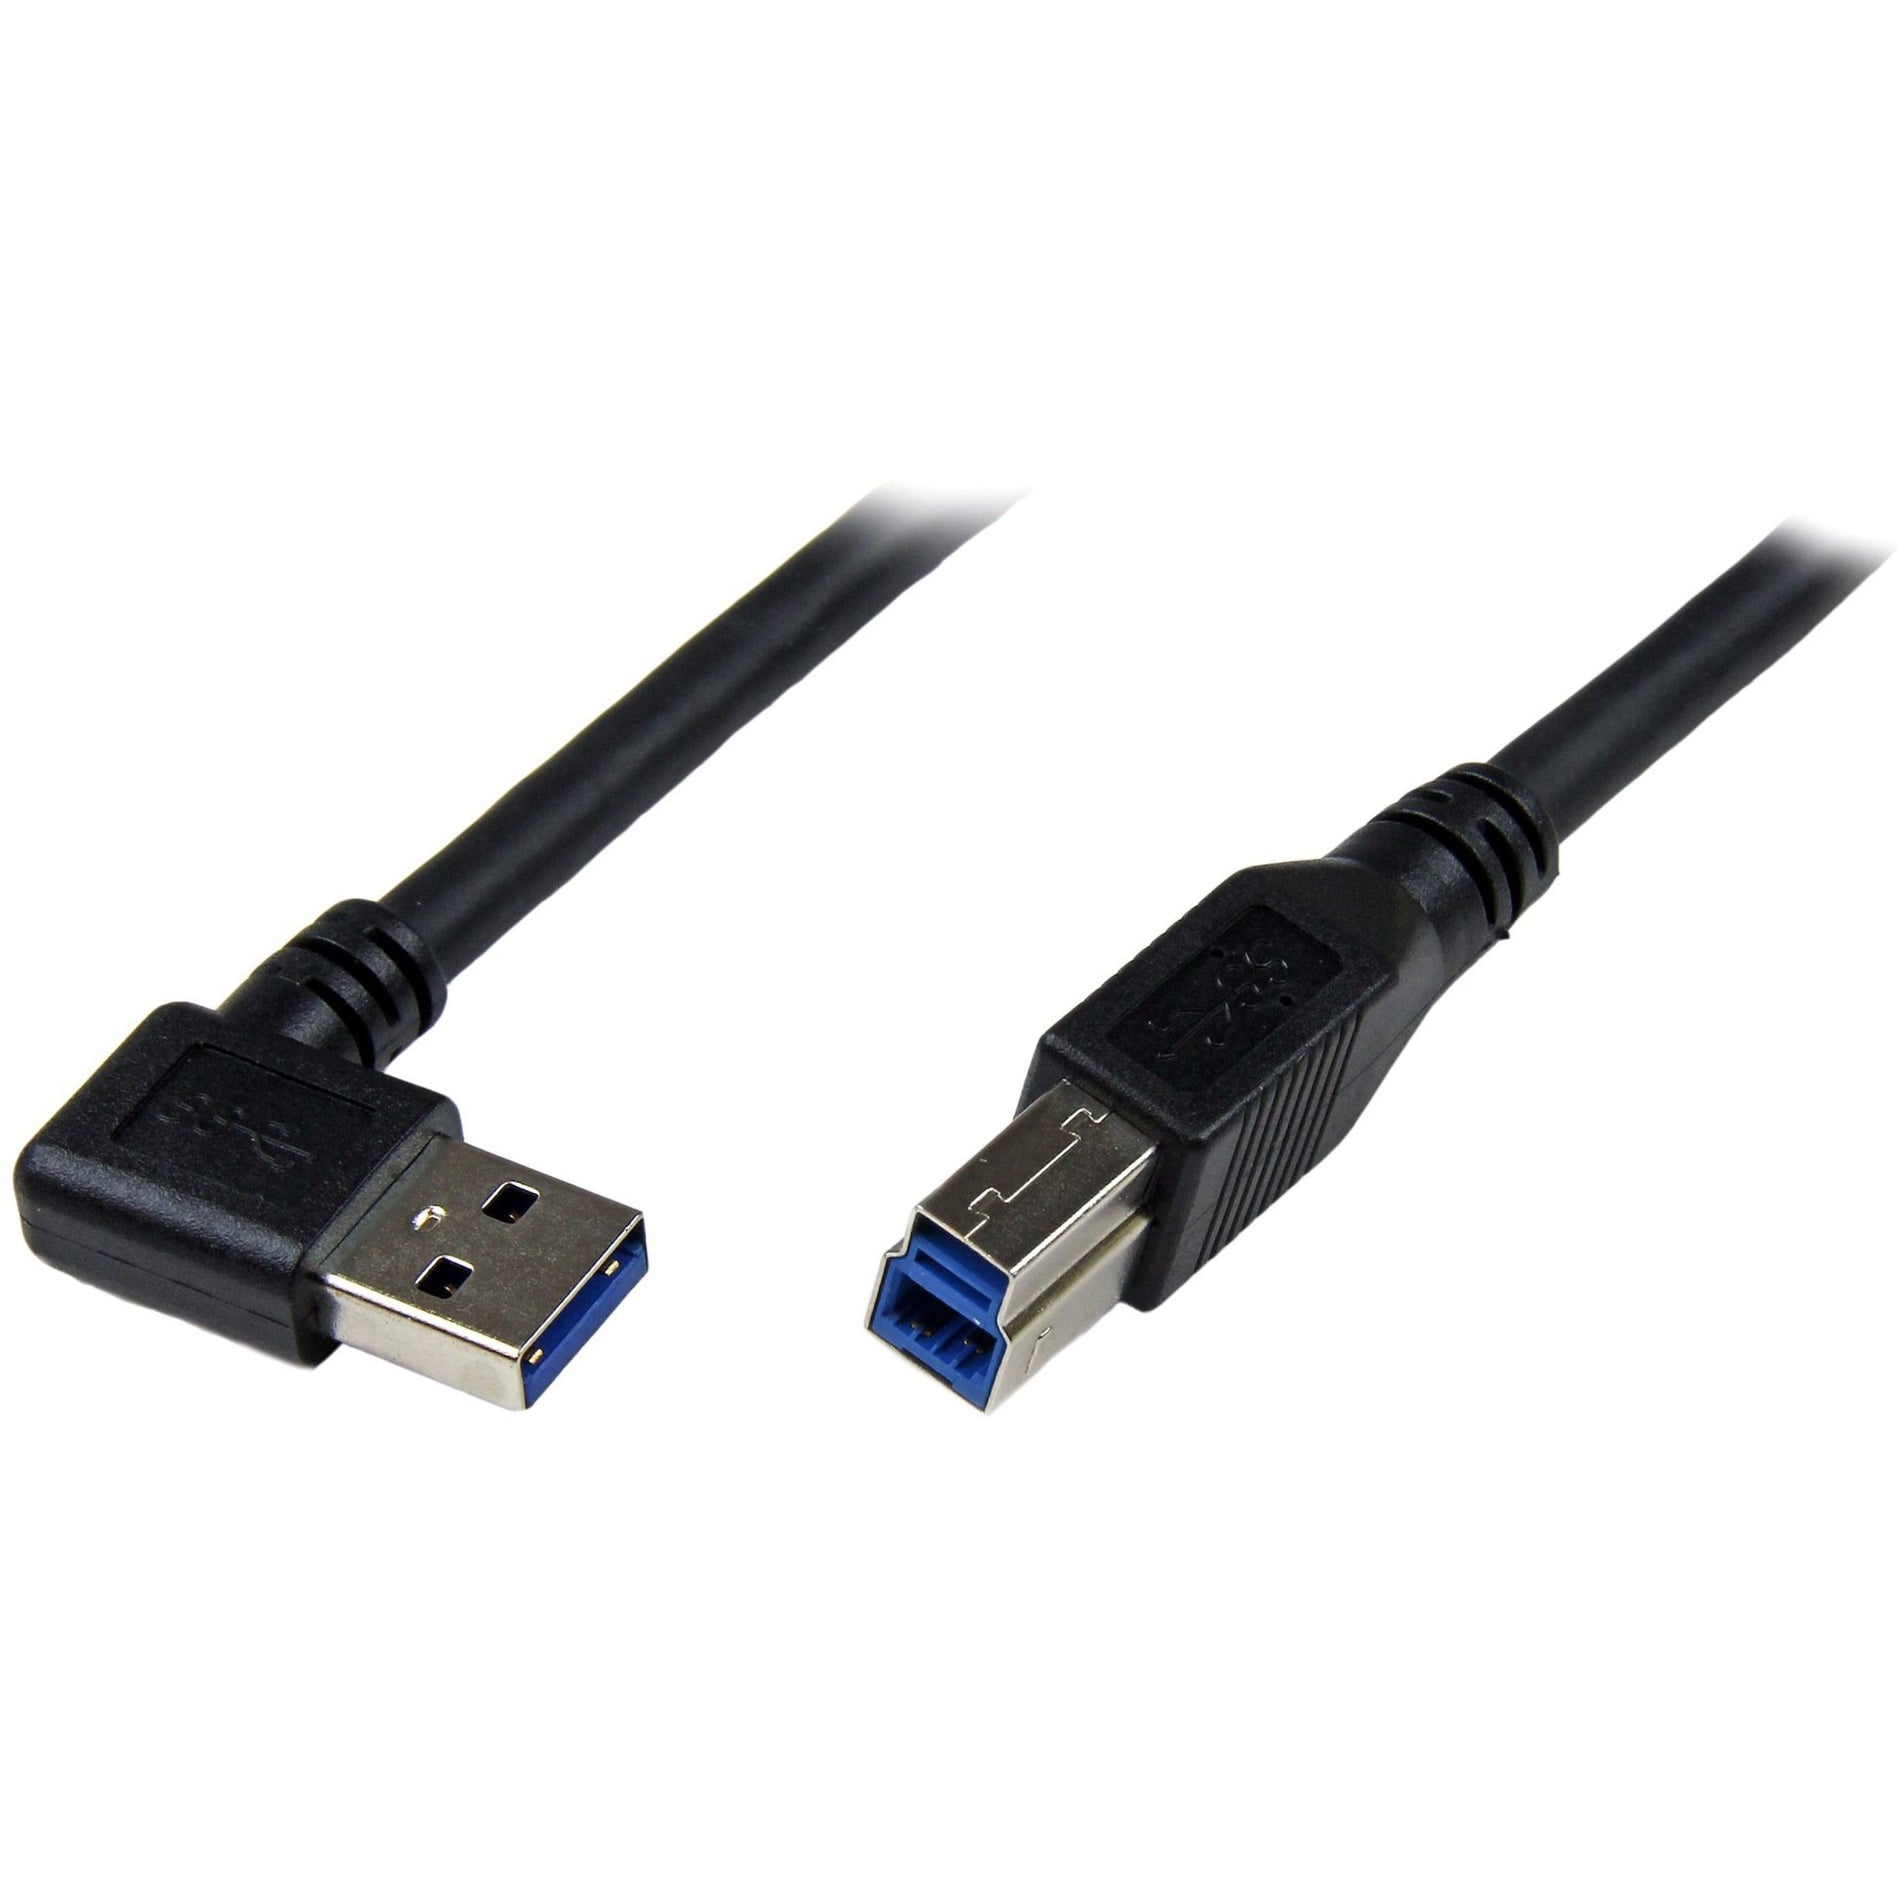 StarTech.com USB3SAB1MRA 1m Black SuperSpeed USB 3.0 Cable - Right Angle A to B, High-Speed Data Transfer